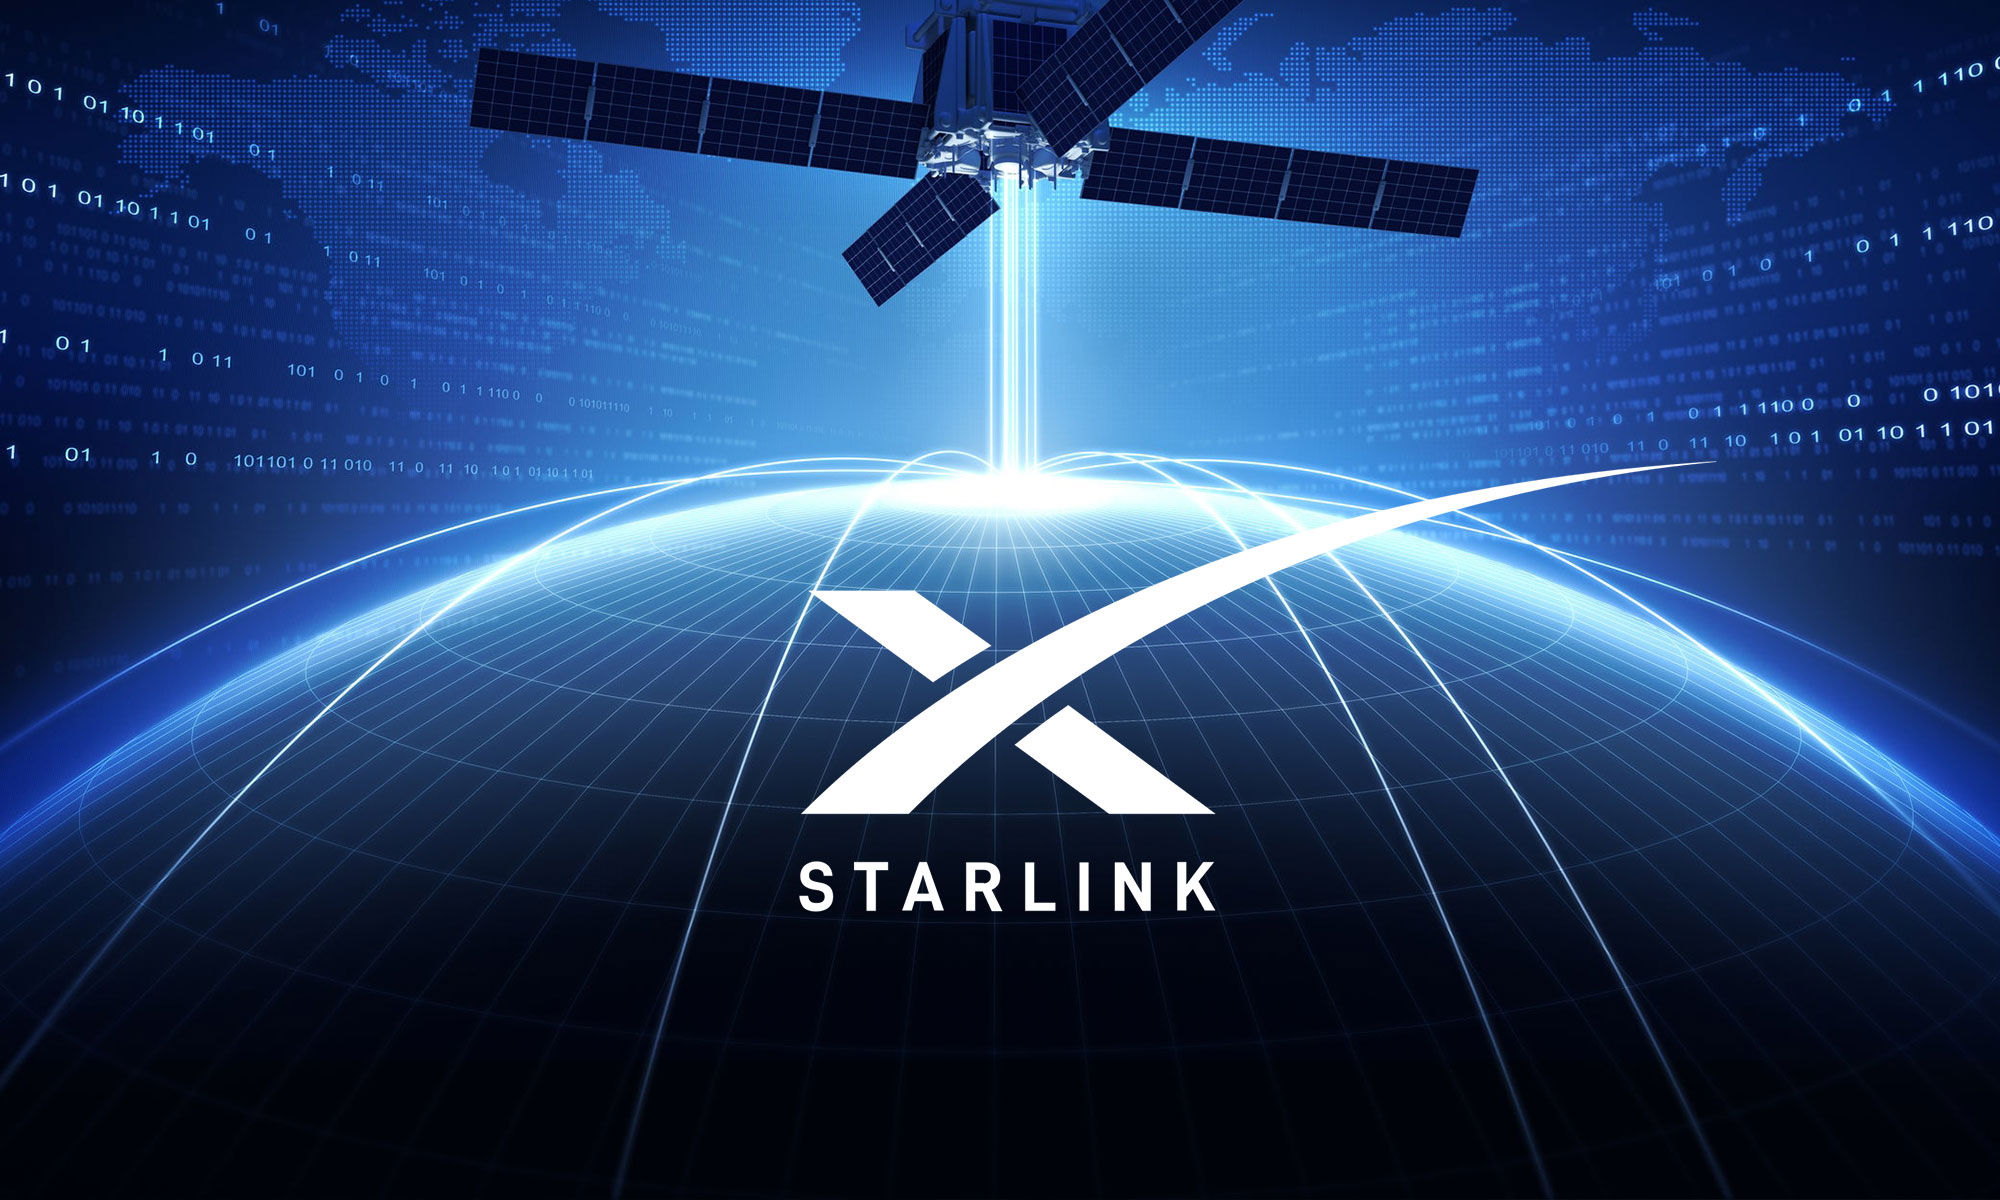 SpaceX has registered the official representation of Starlink in Ukraine